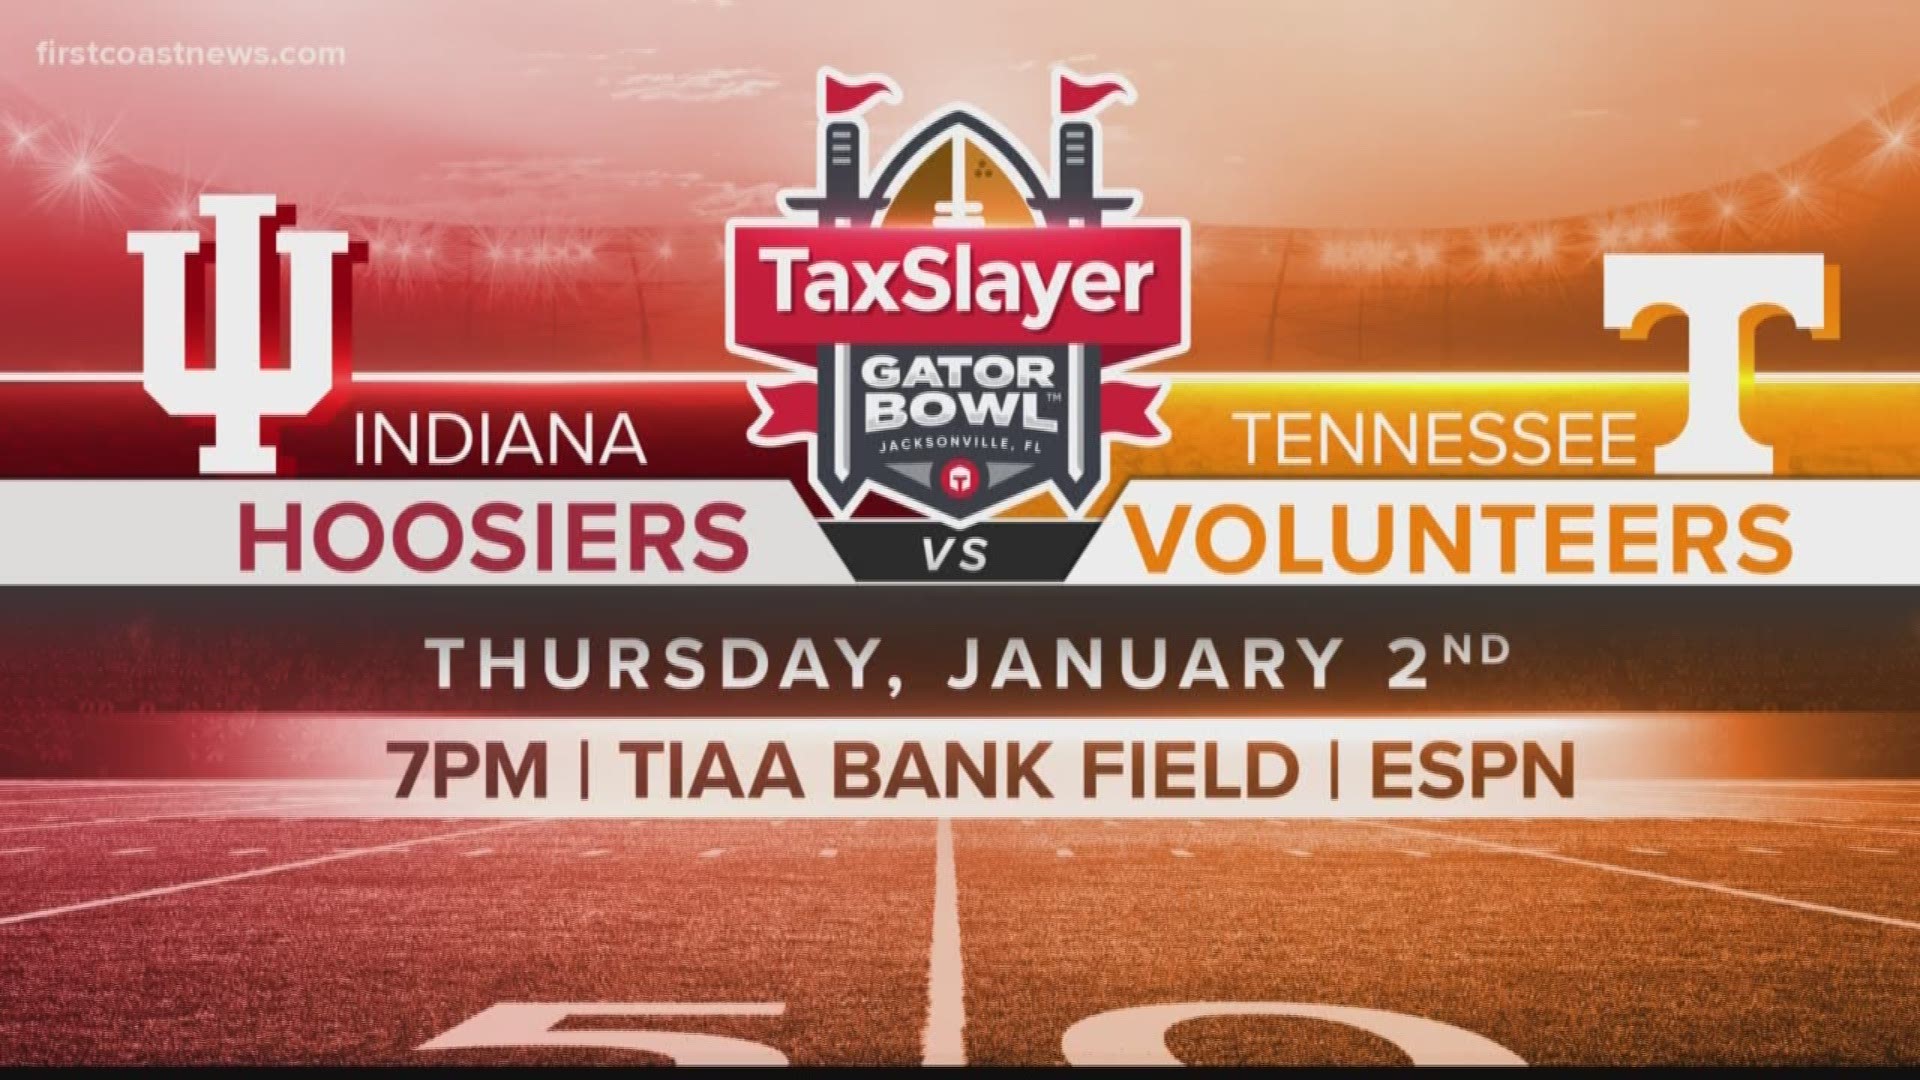 Your ultimate TaxSlayer Gator Bowl guide